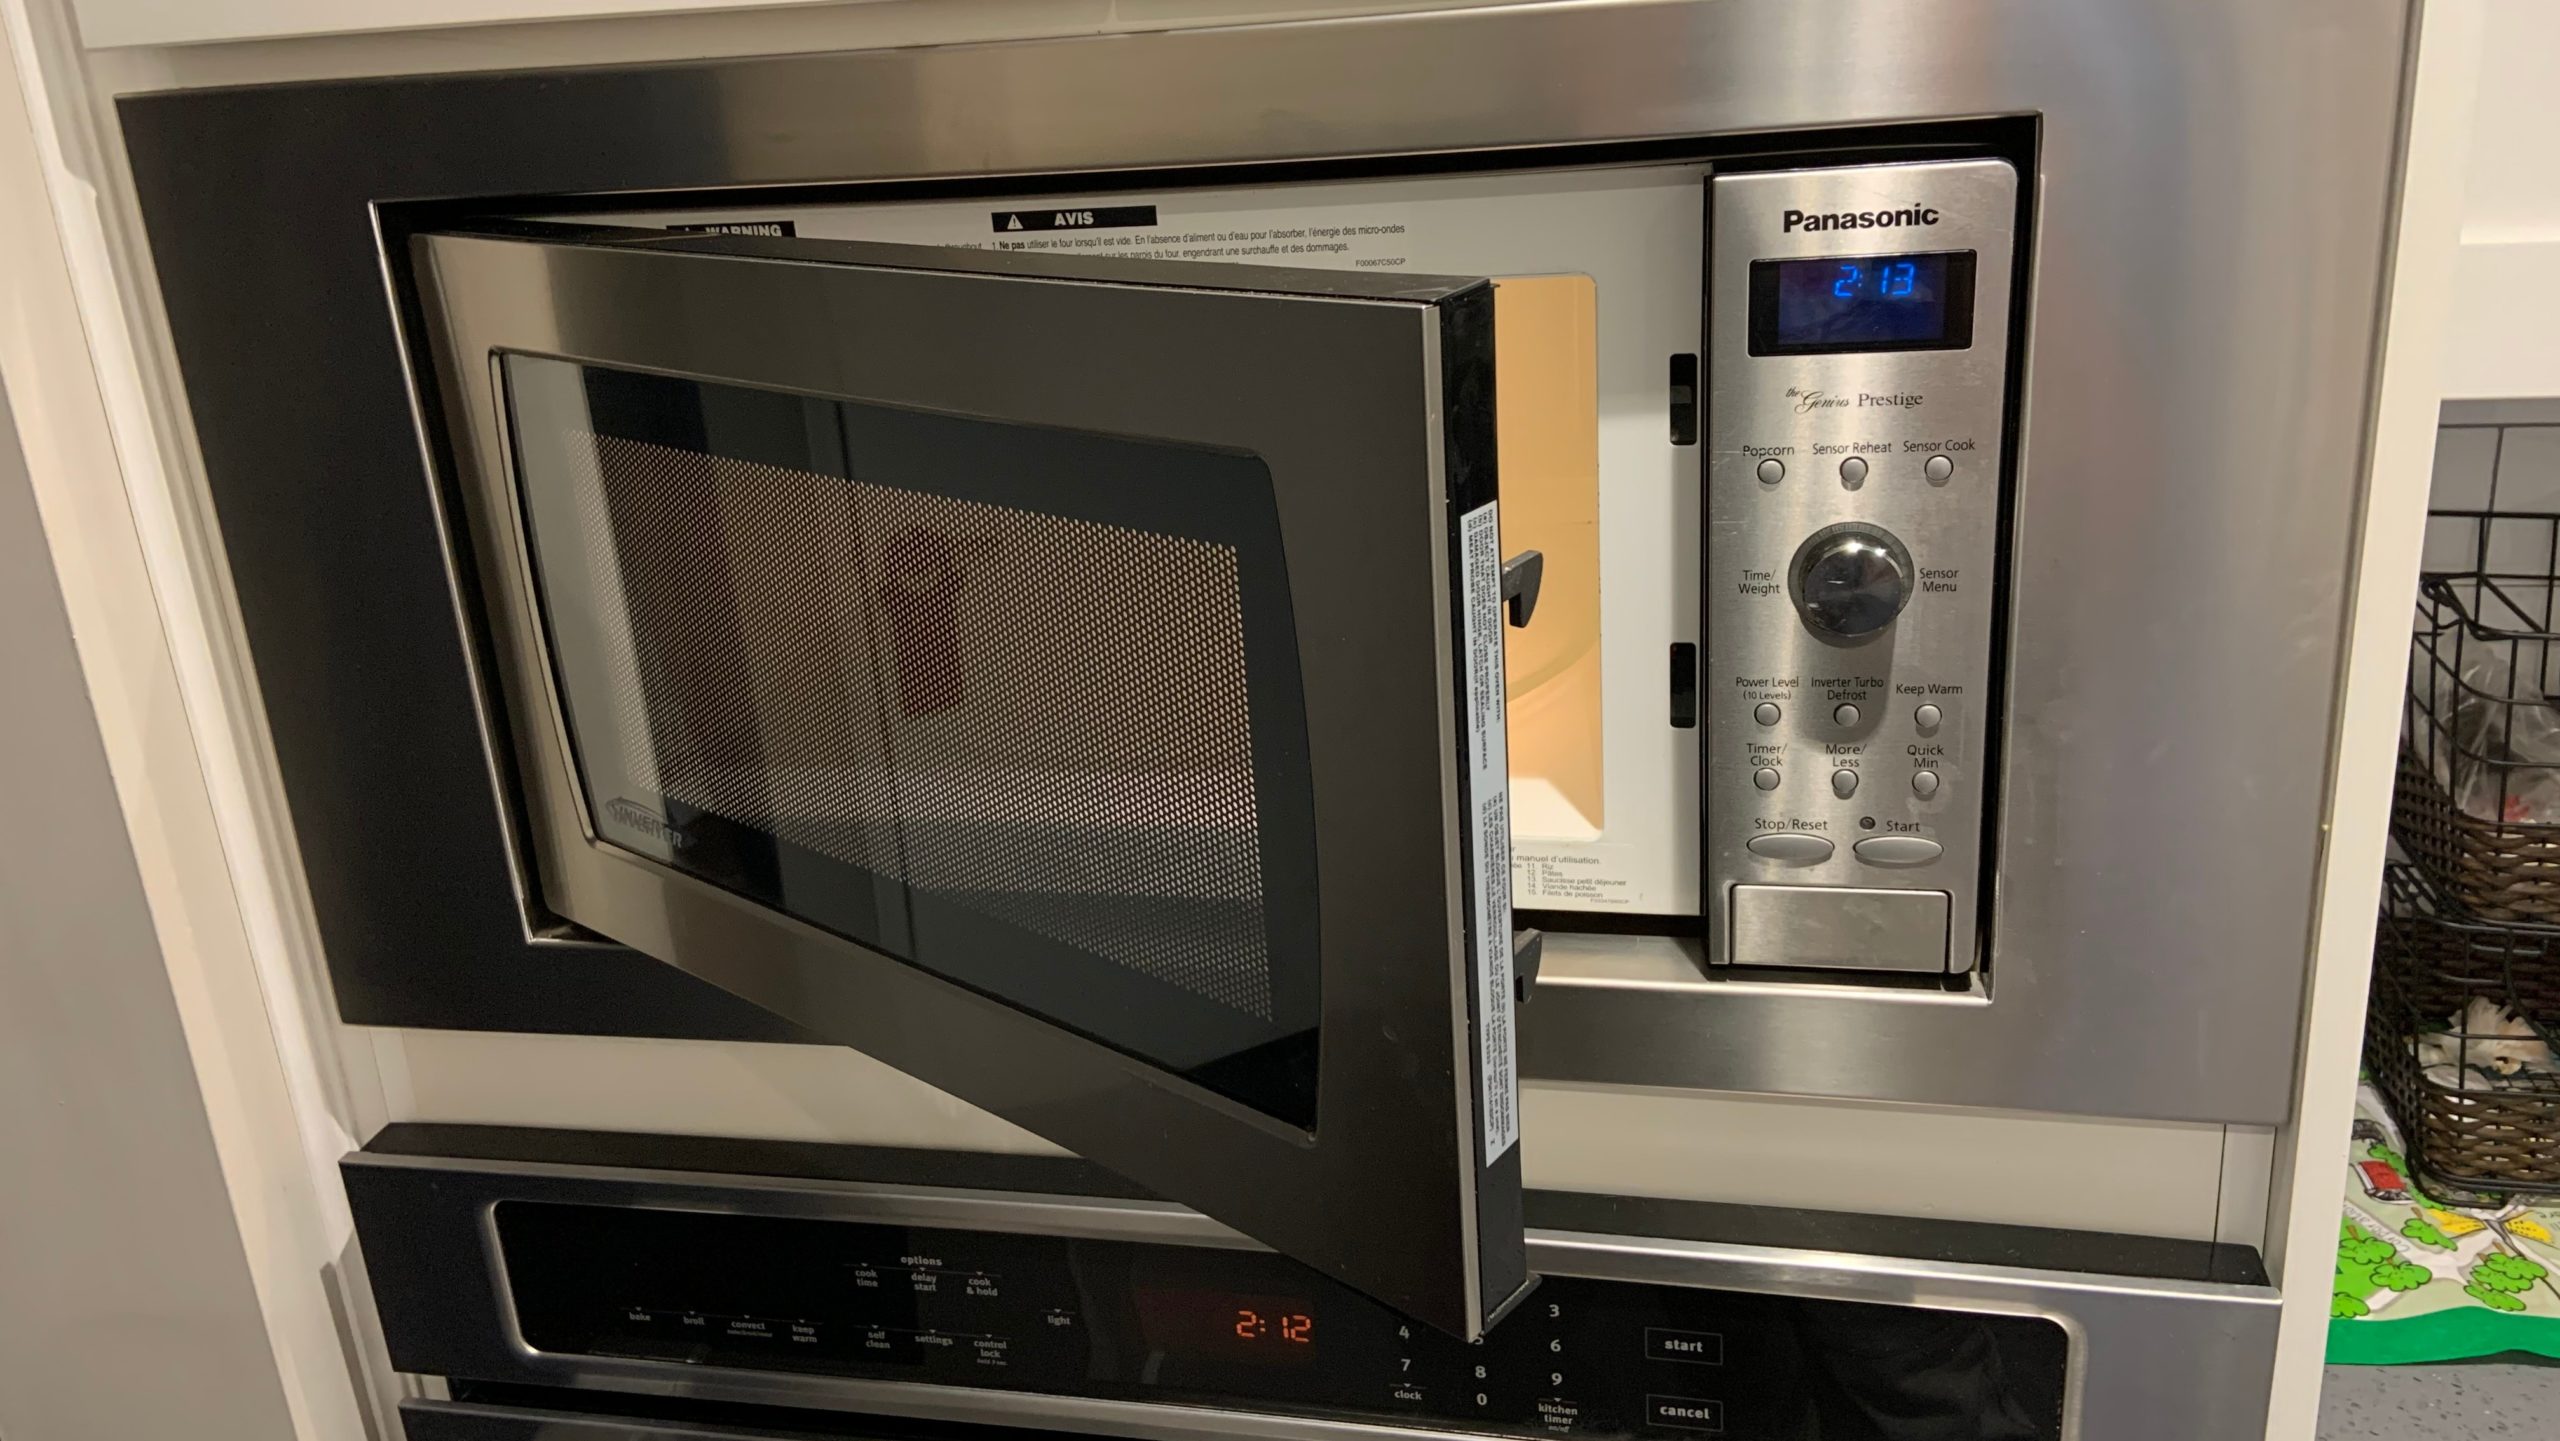 Behold, my microwave oven, and not the microwave oven responsible for the so-called perytons. (Image: George Dvorsky)